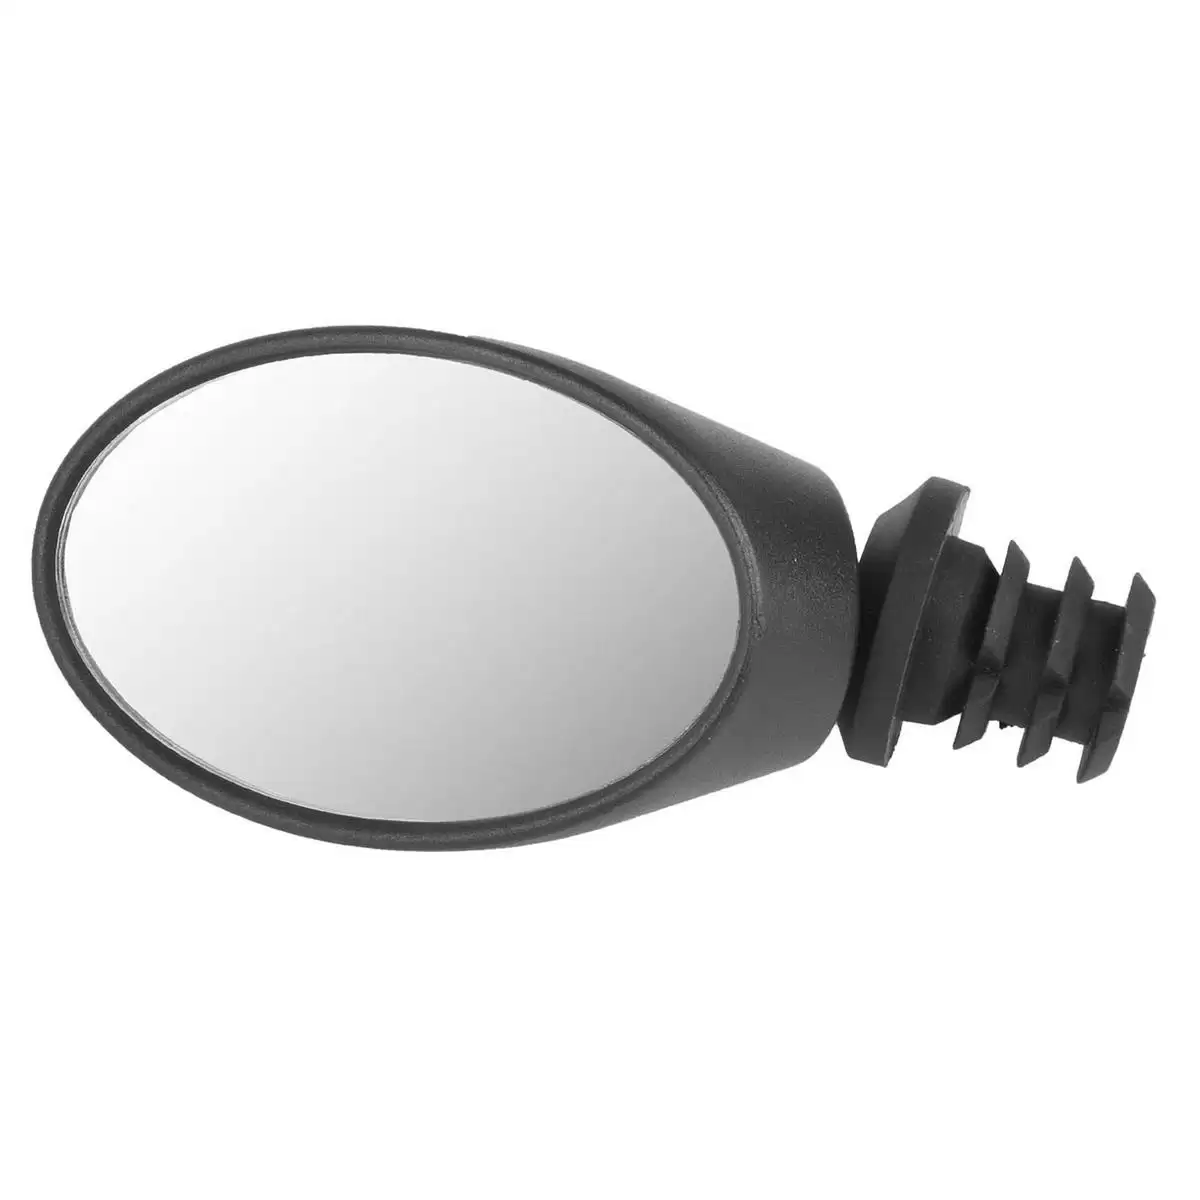 Spy Oval adjustable left / right bicycle mirror - image